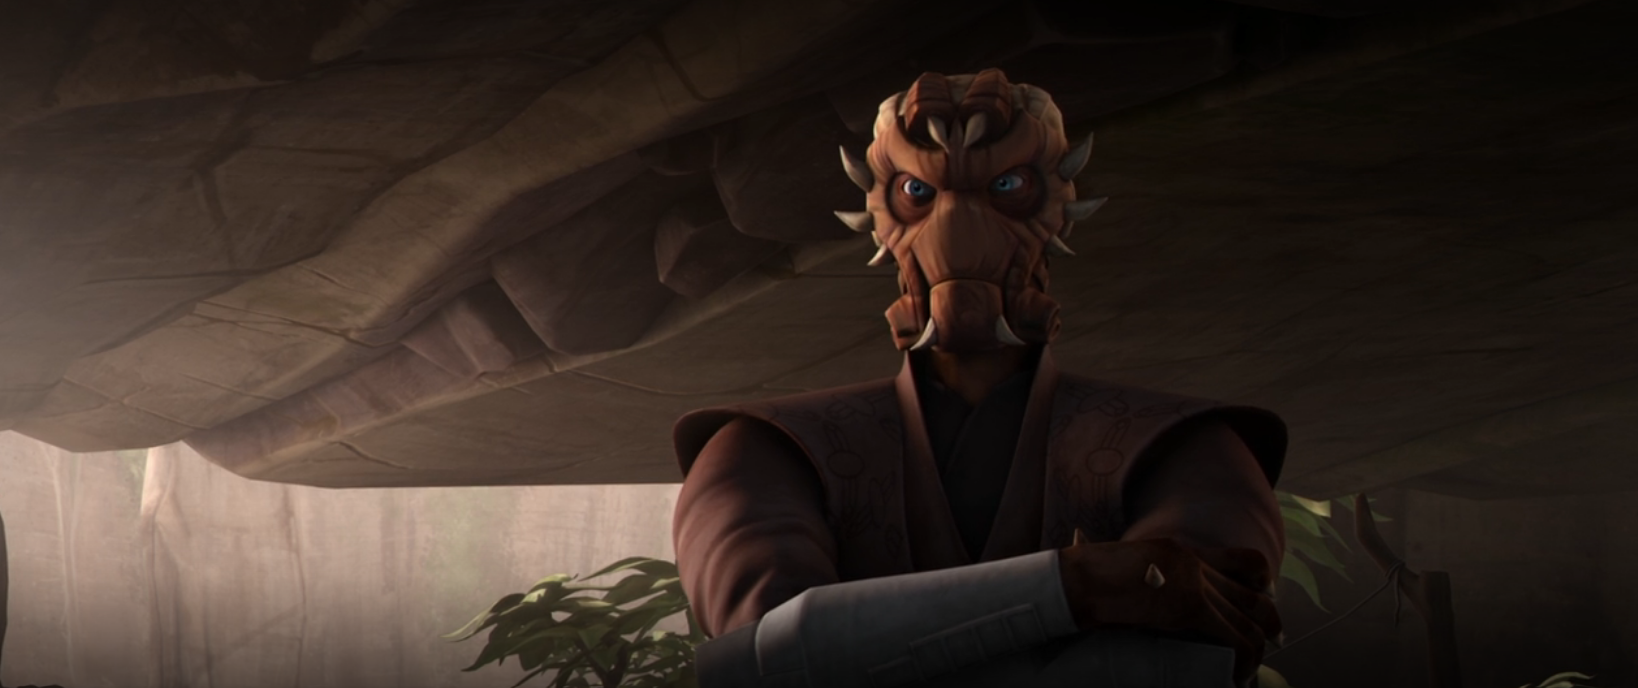 Talkin’ Tauntauns Podcast episode 119: 'The Clone Wars' Rewatch 2 - The Toydaria Duology